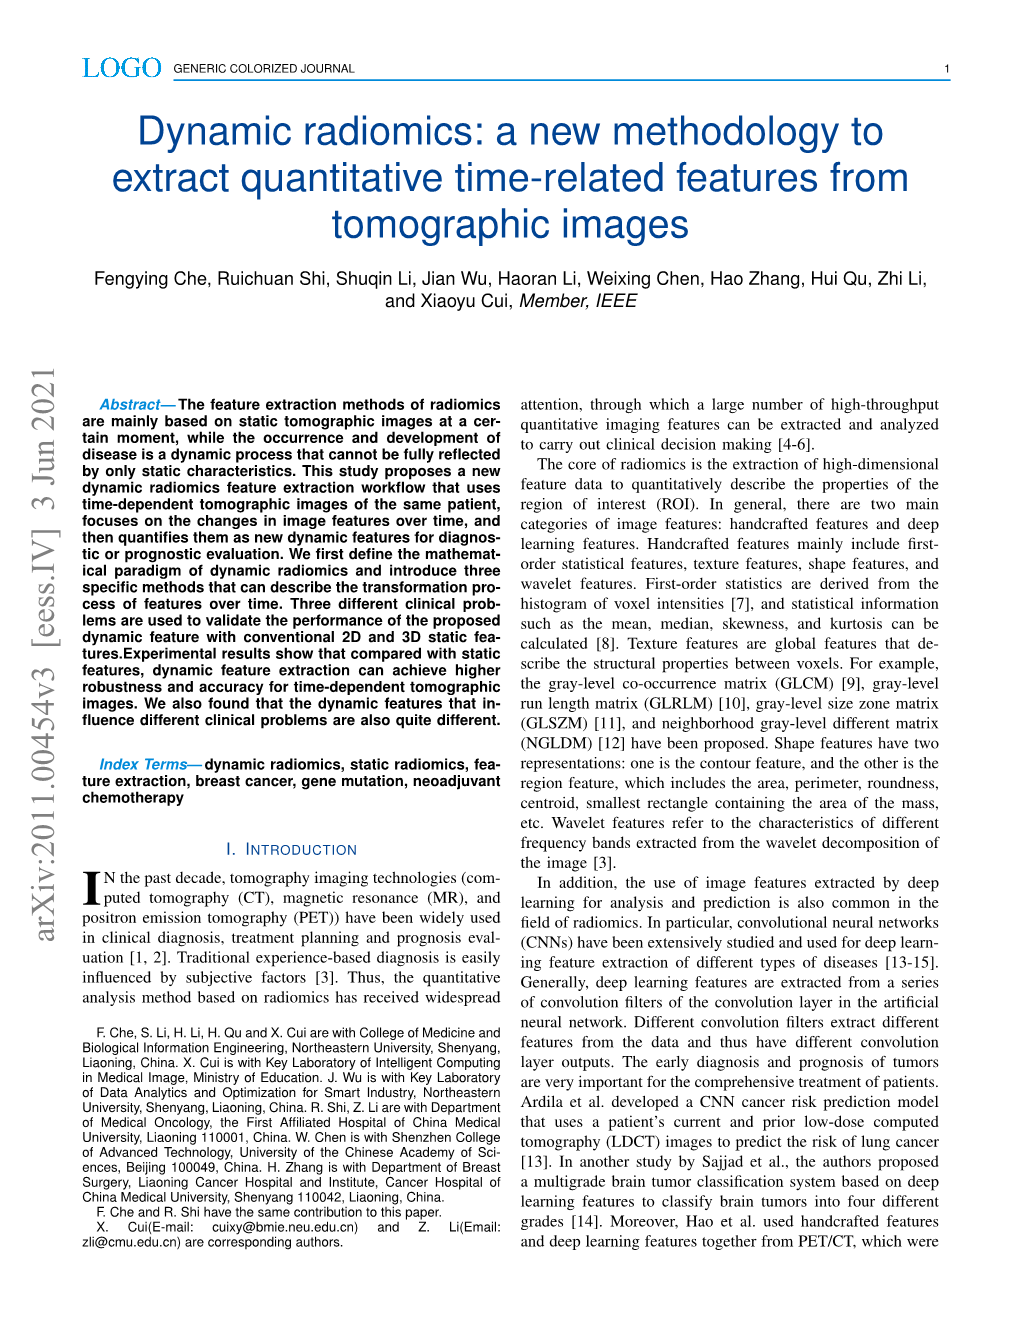 Dynamic Radiomics: a New Methodology to Extract Quantitative Time-Related Features from Tomographic Images